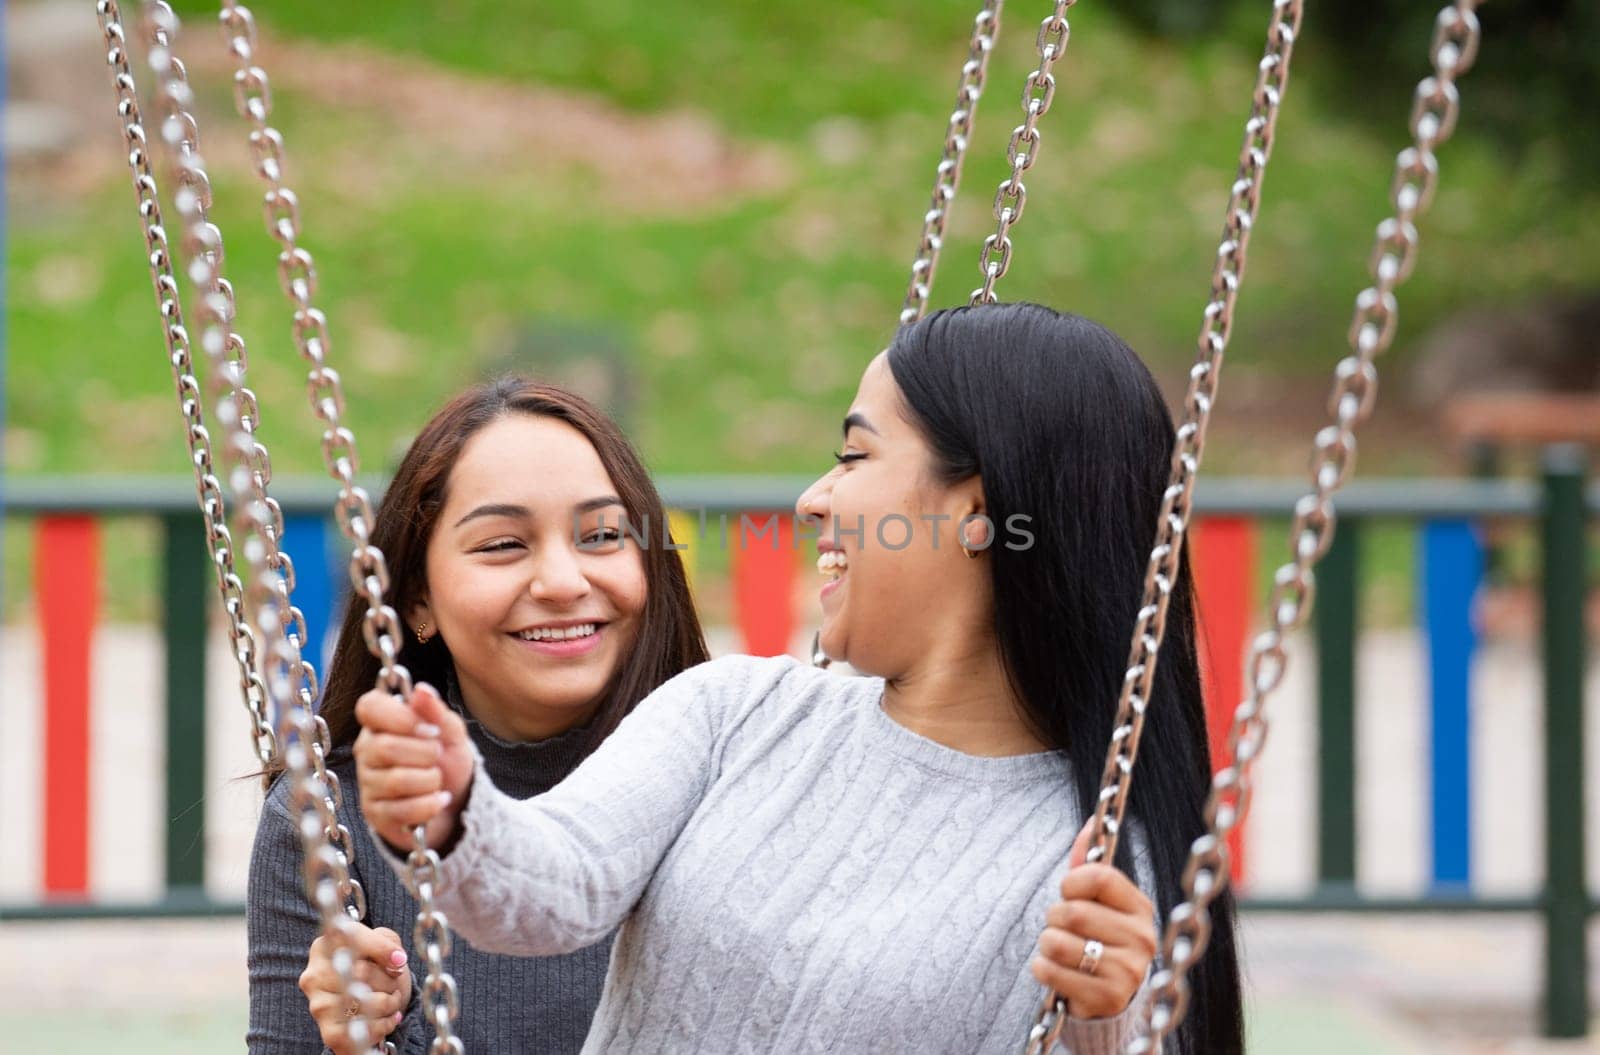 Portrait of two latin women friends are swinging on a swing set, smiling and laughing.